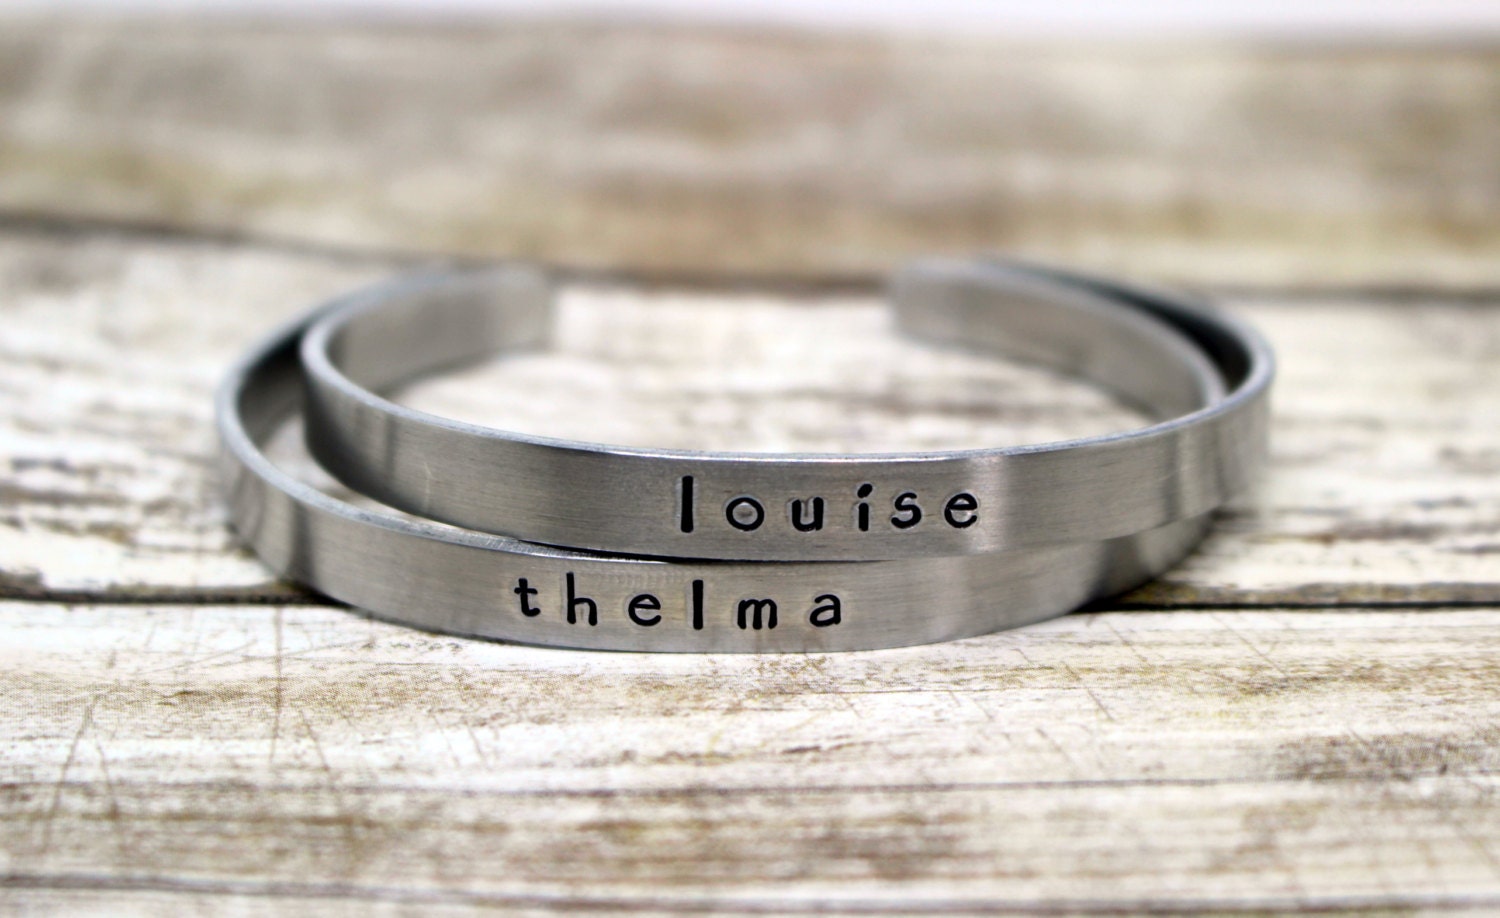 Best Friend/Thelma and Louise Bracelets